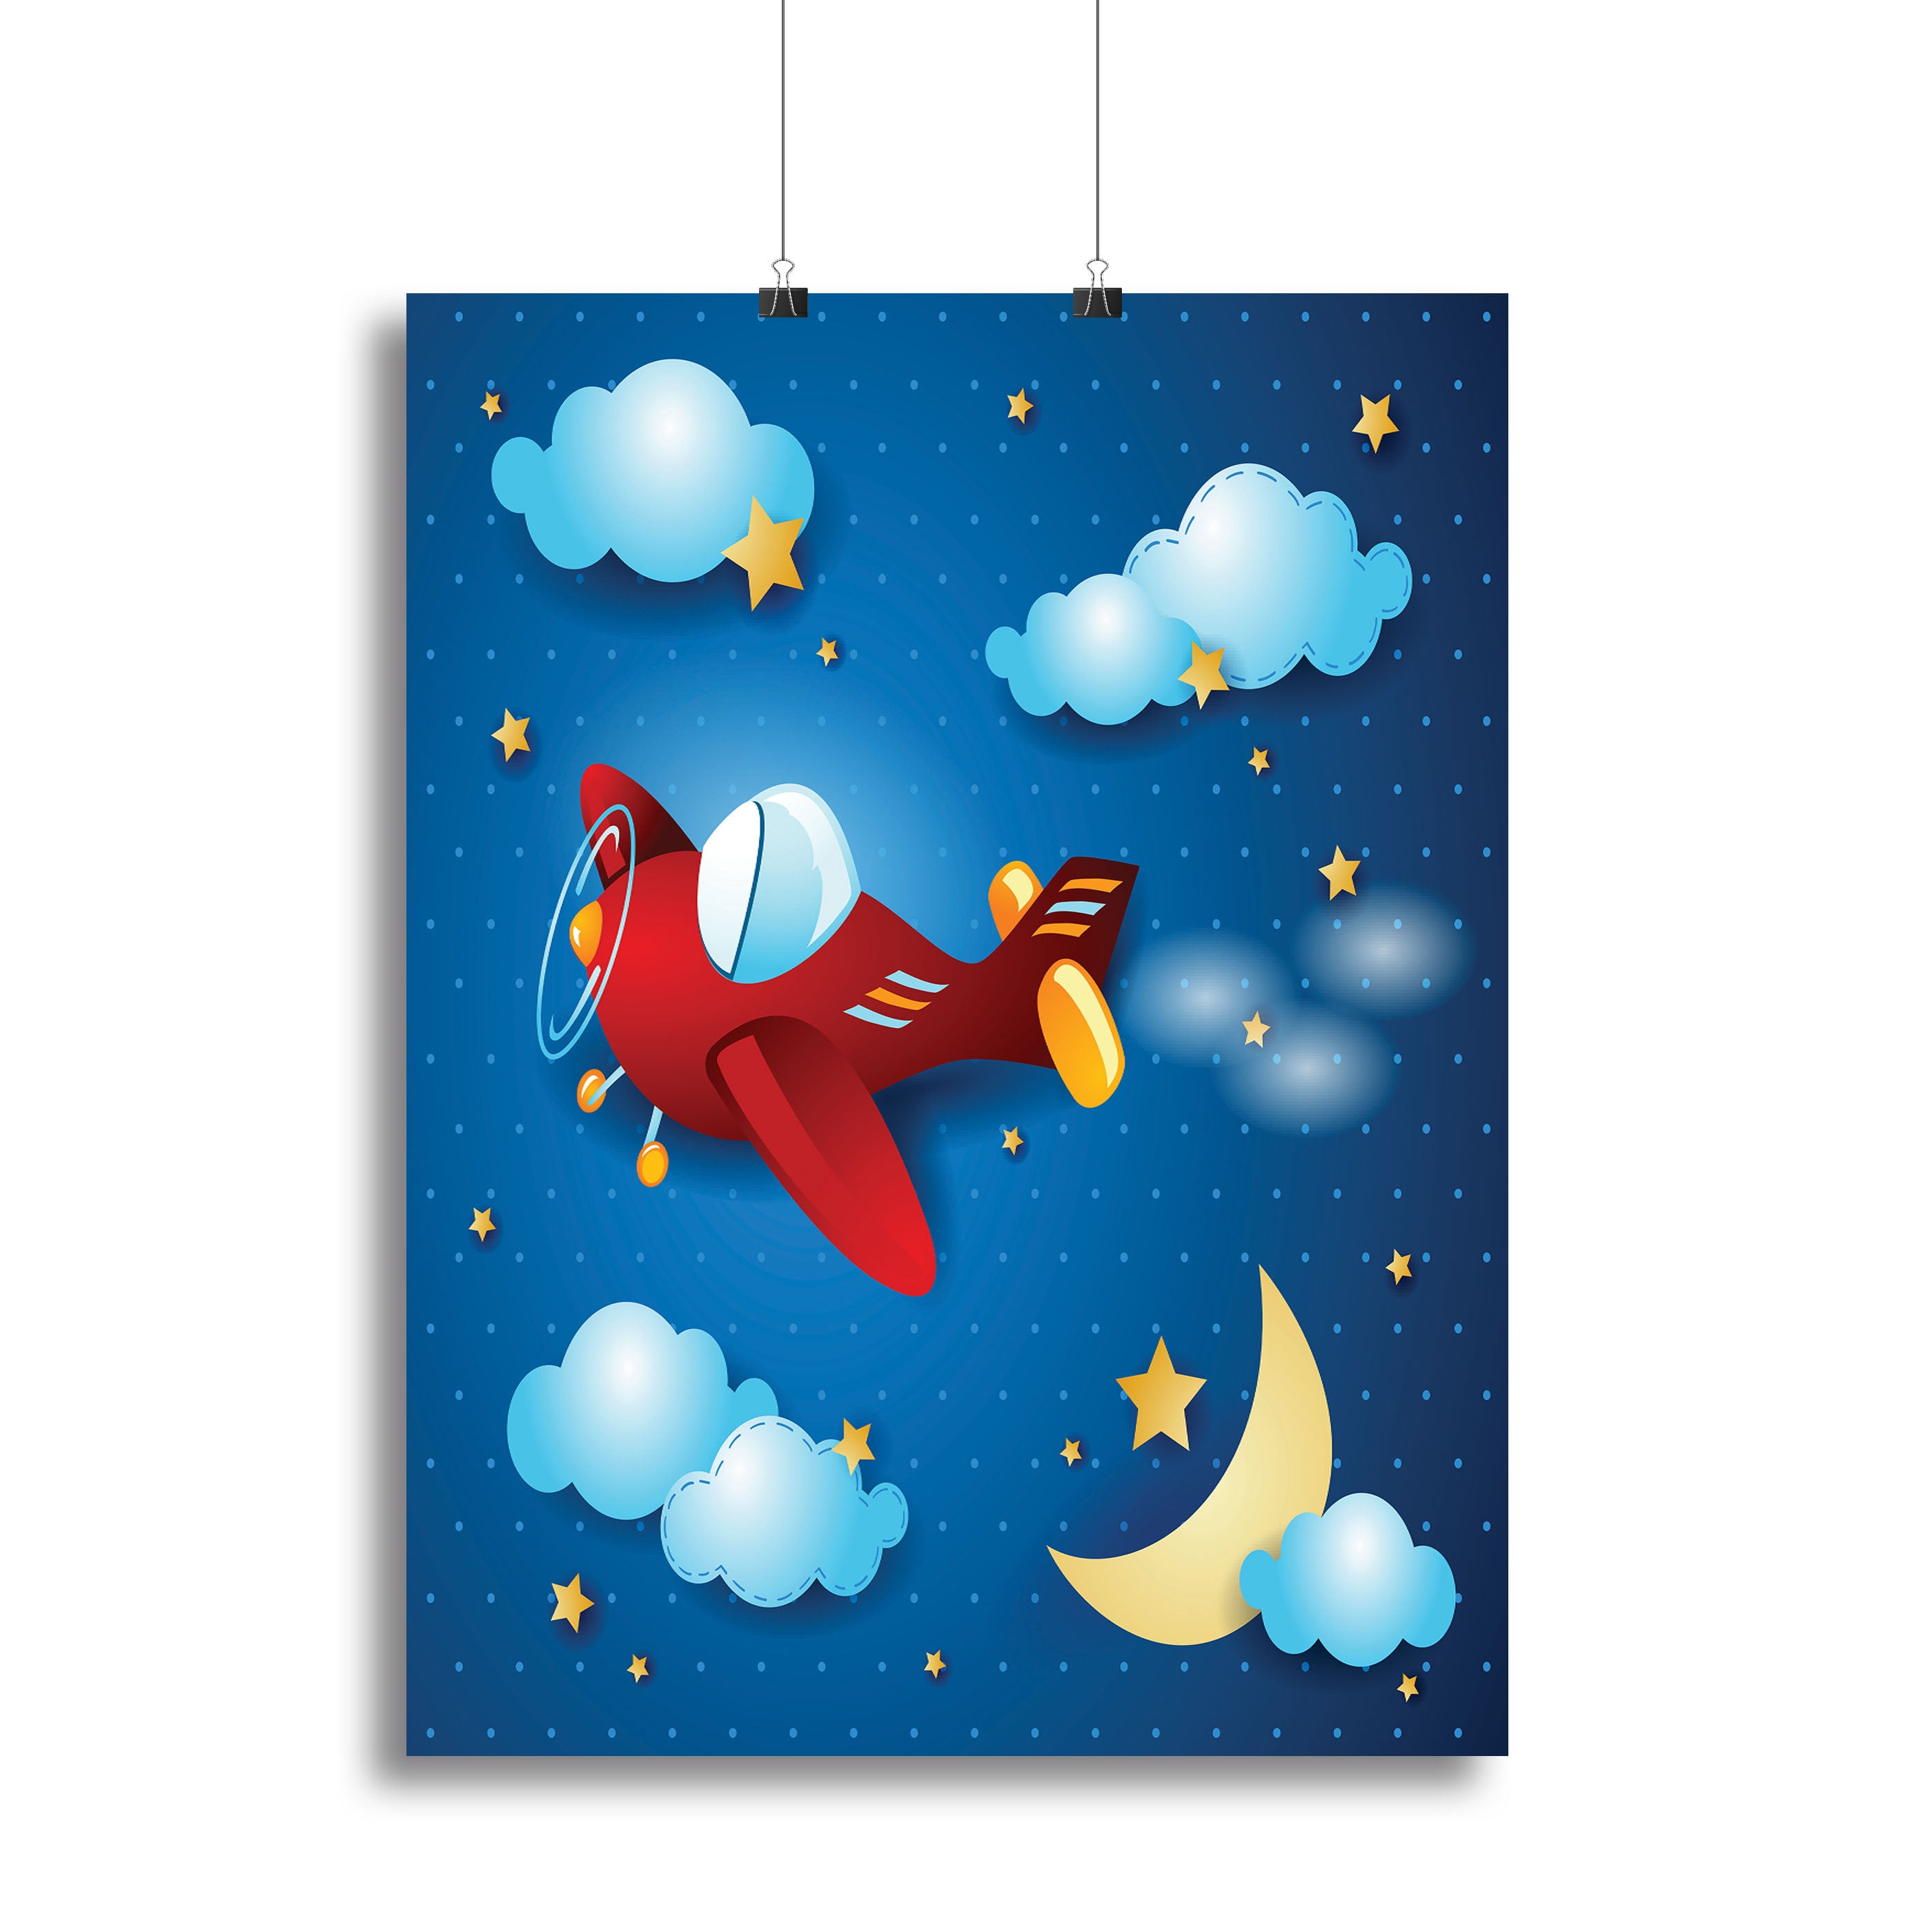 Retro airplane by night Canvas Print or Poster - Canvas Art Rocks - 2